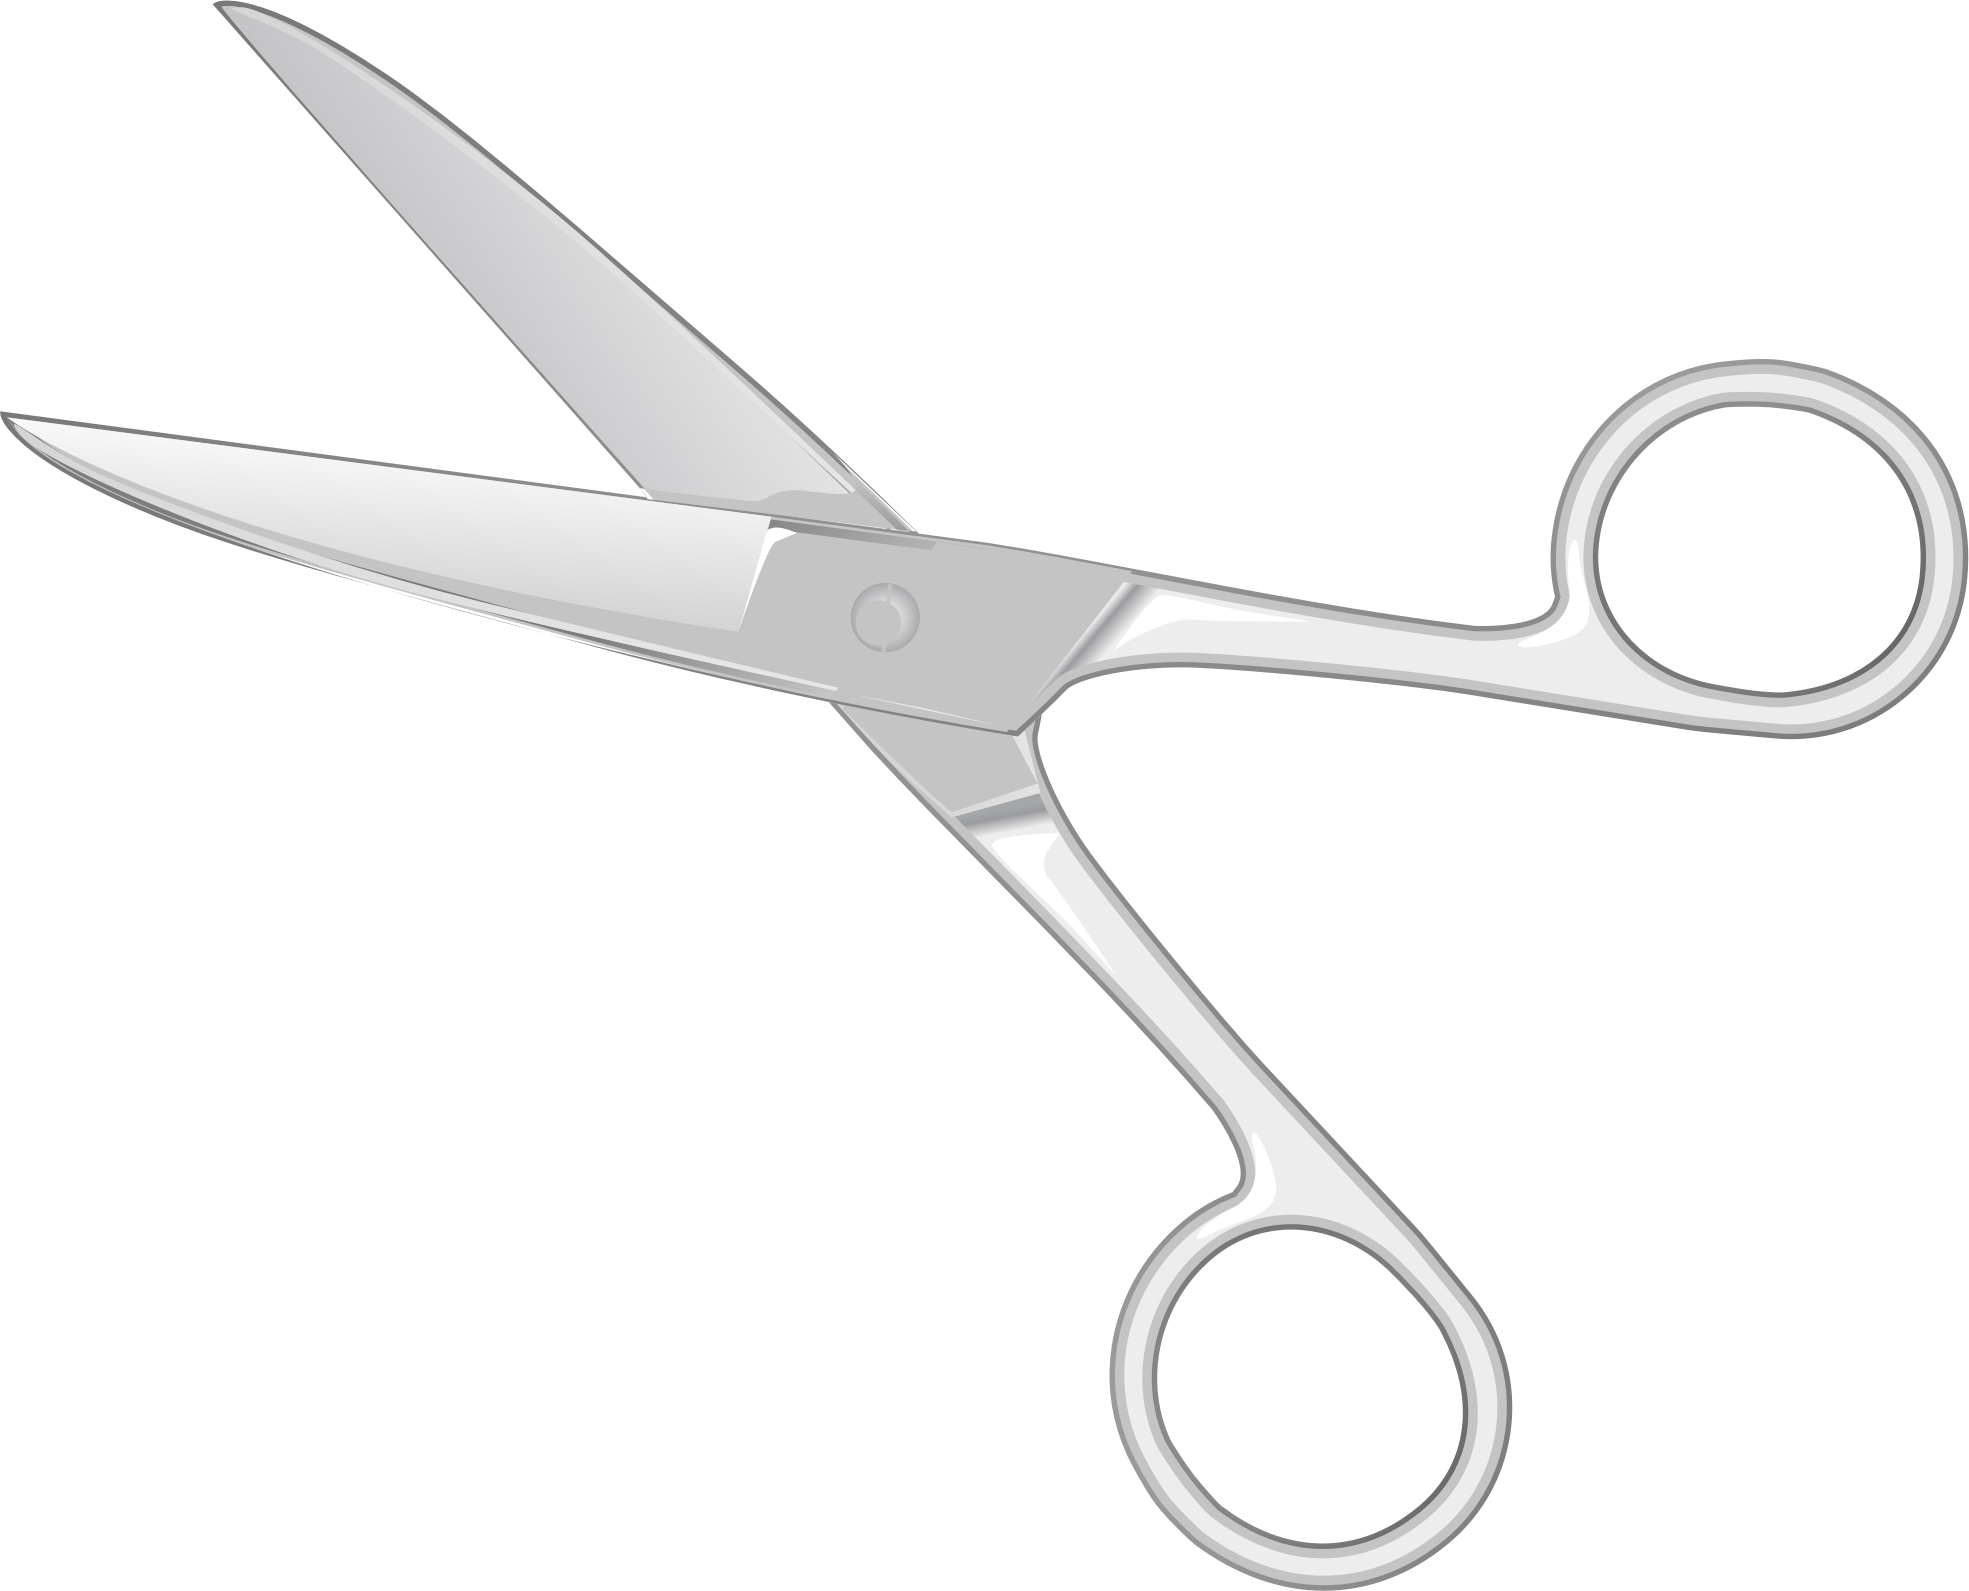 Clipart scissors free download on WebStockReview